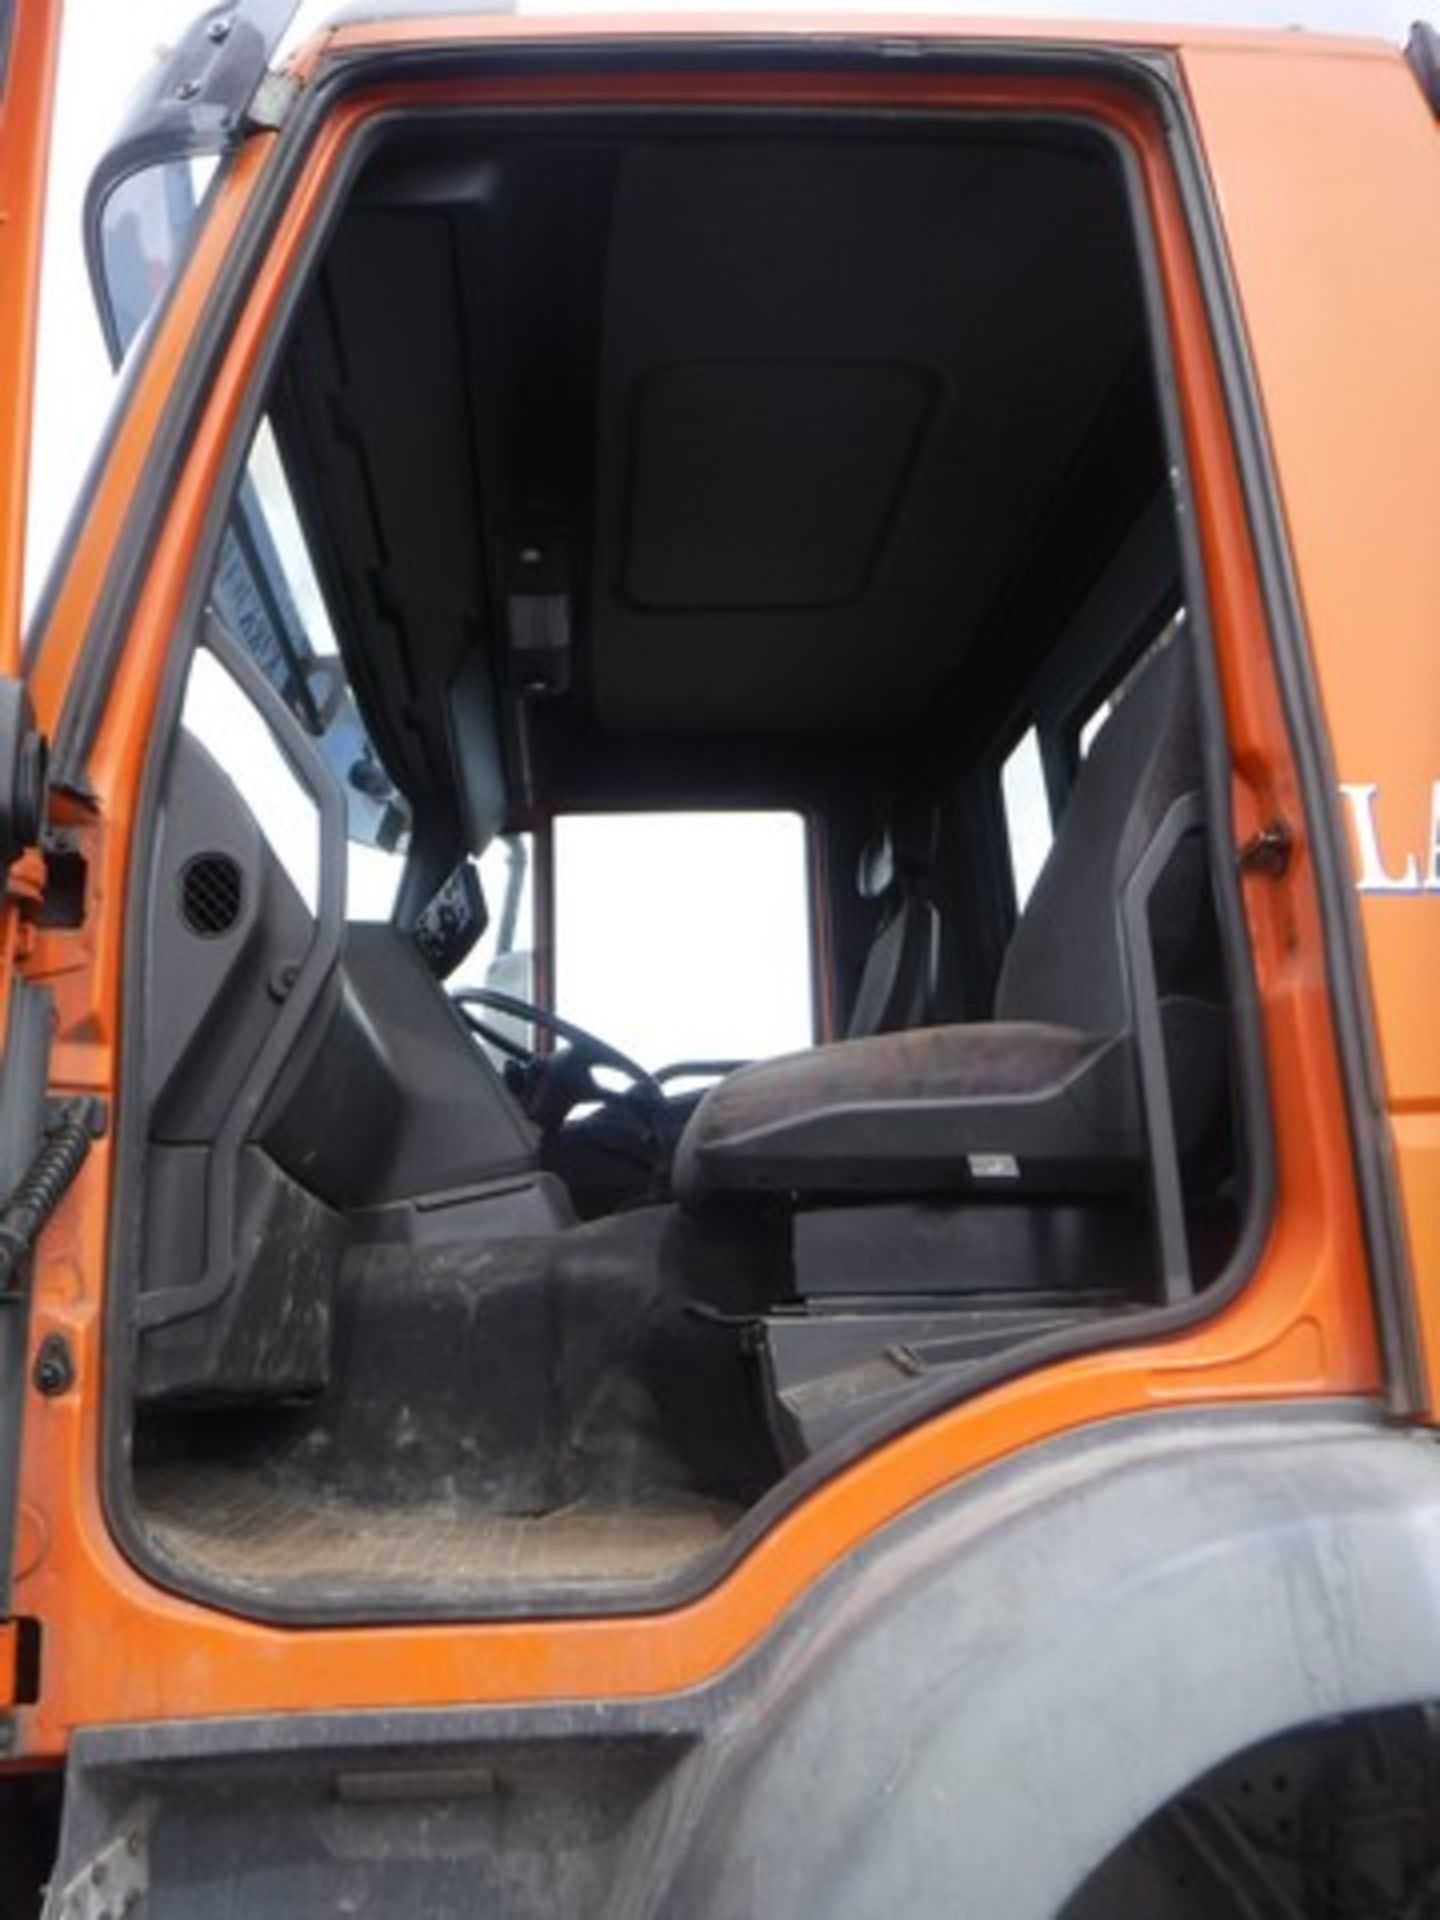 IVECO DAILY 50C15 3.5WB - 7790cc - Image 5 of 41